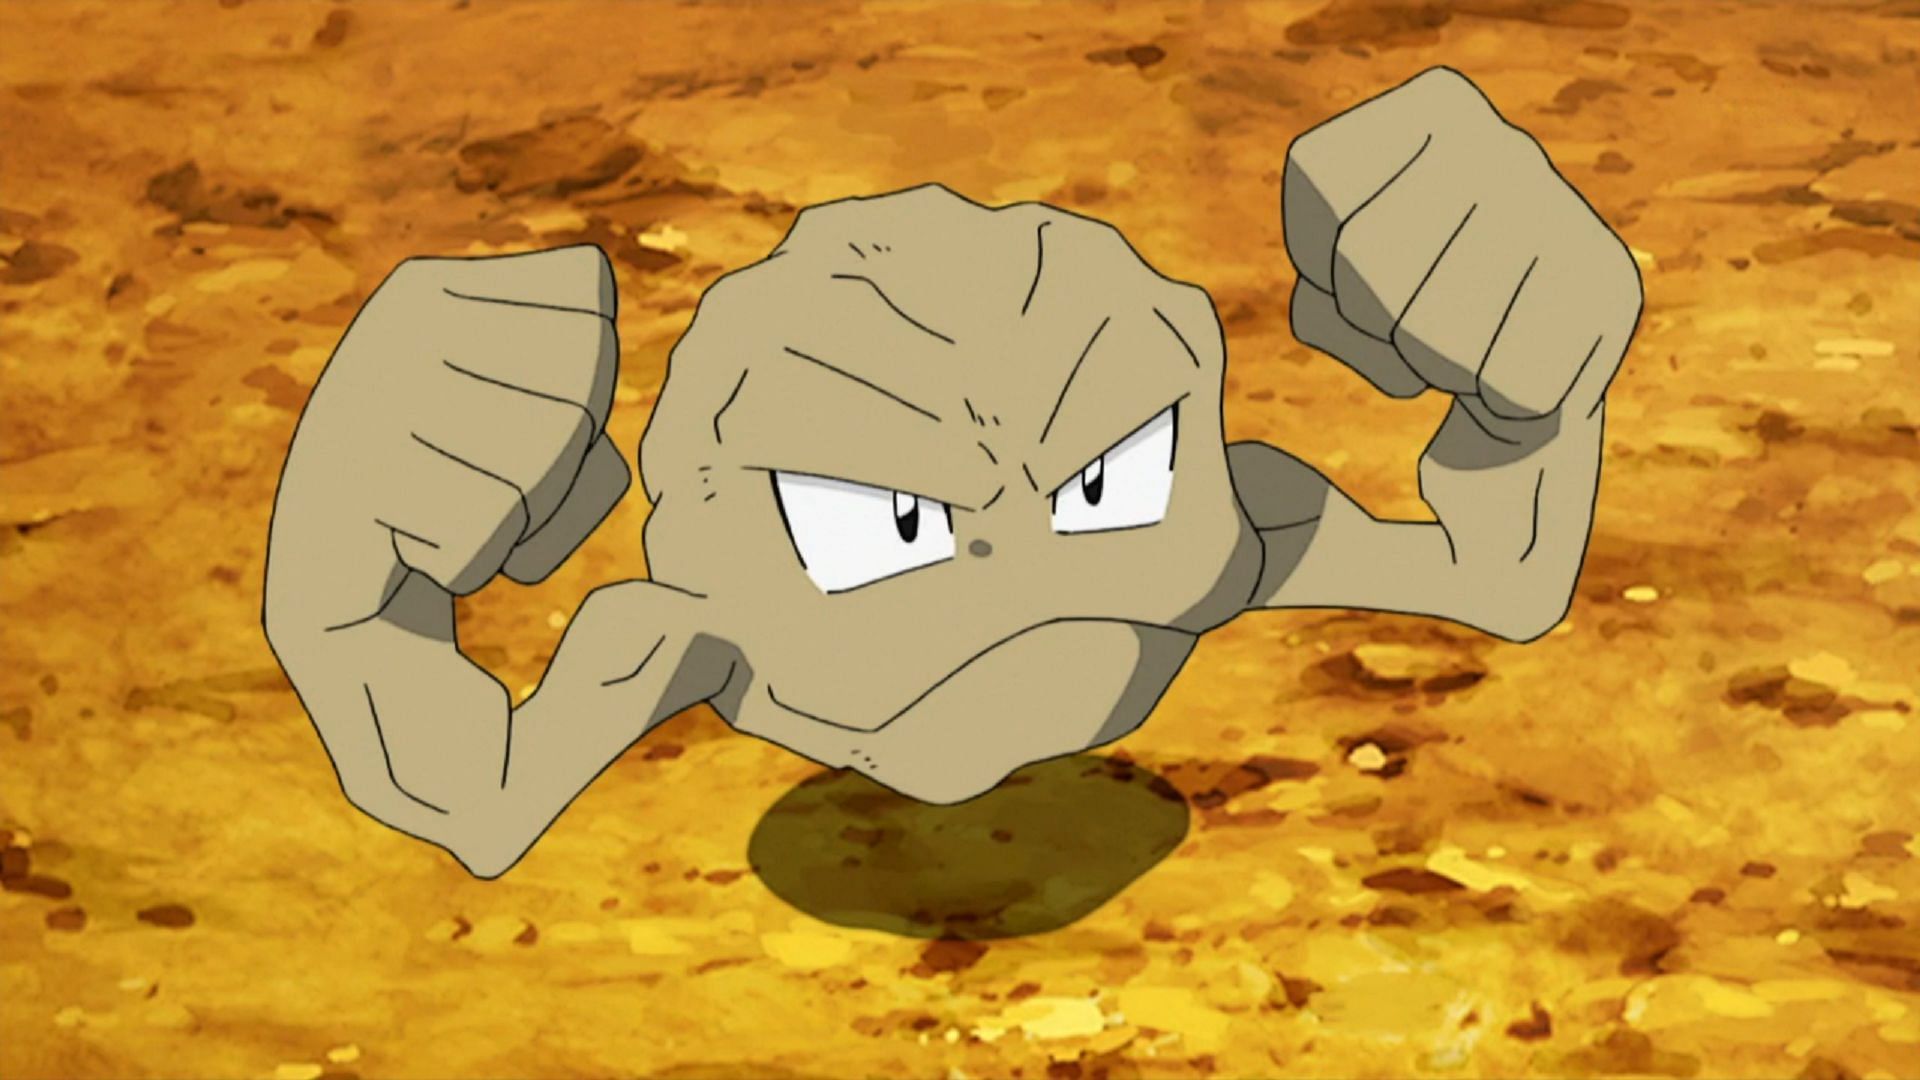 Geodude was the Pokedle Classic answer for March 18, 2024 (Image via The Pokemon Company)